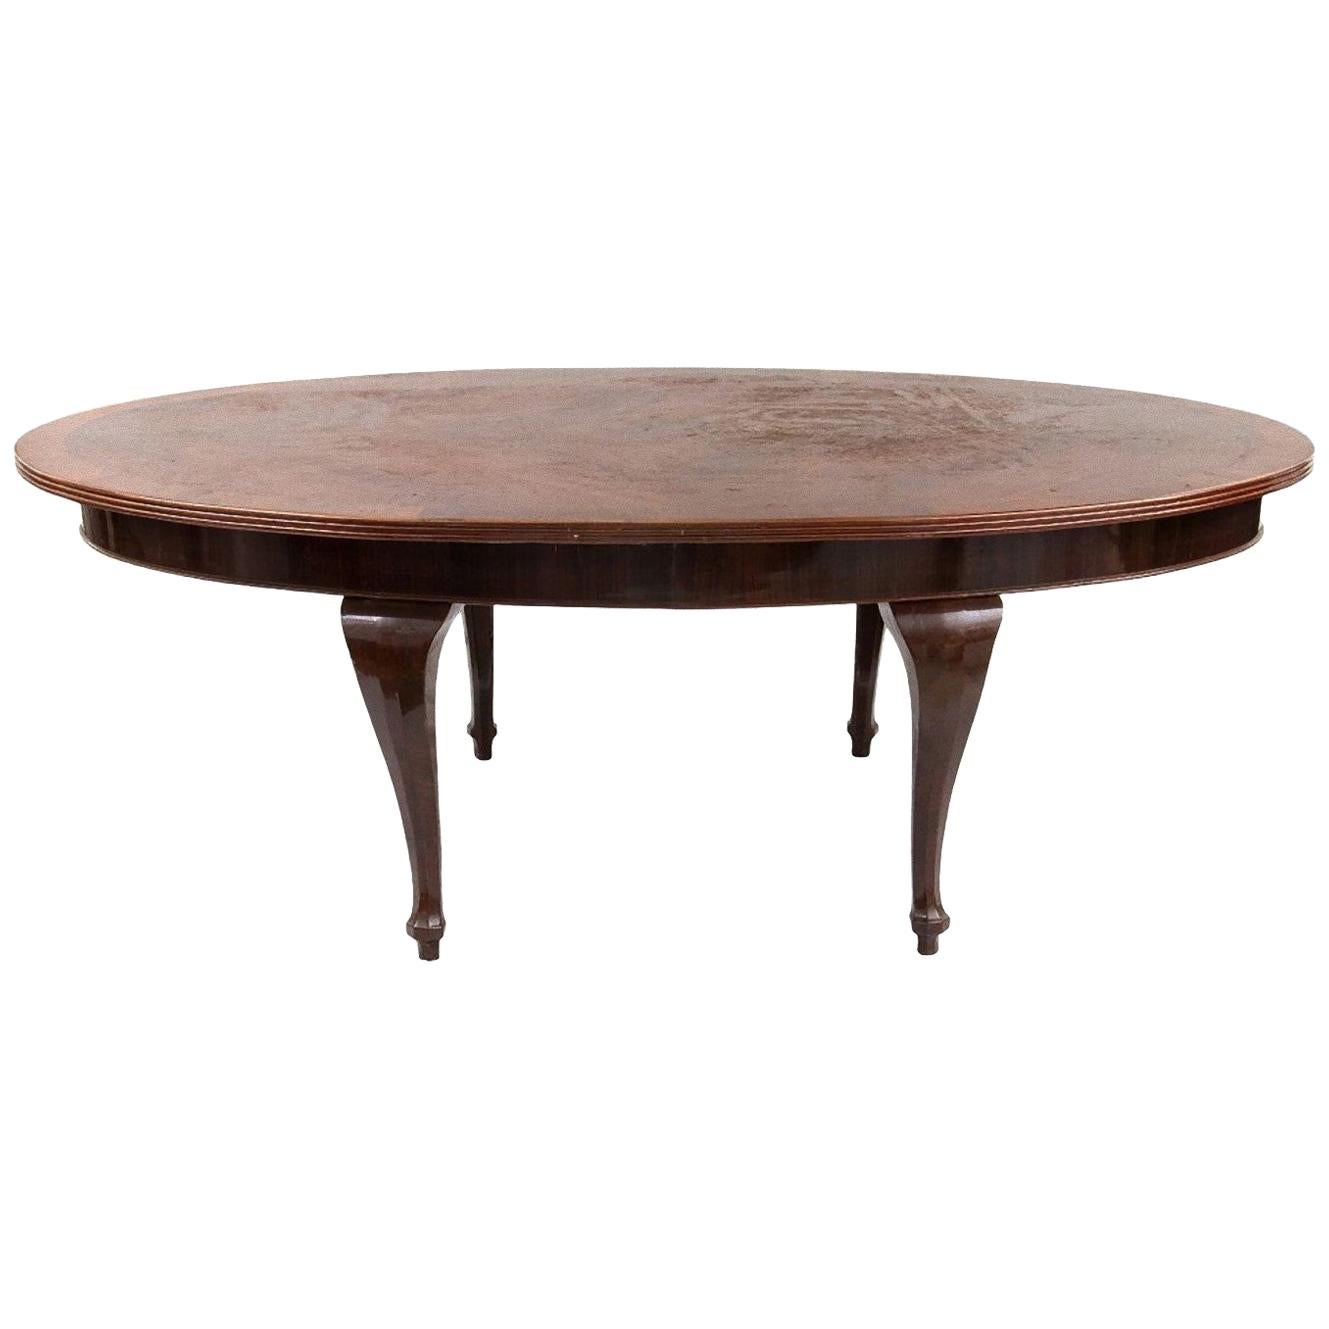 Rosewood Round Table, Late 19th Century